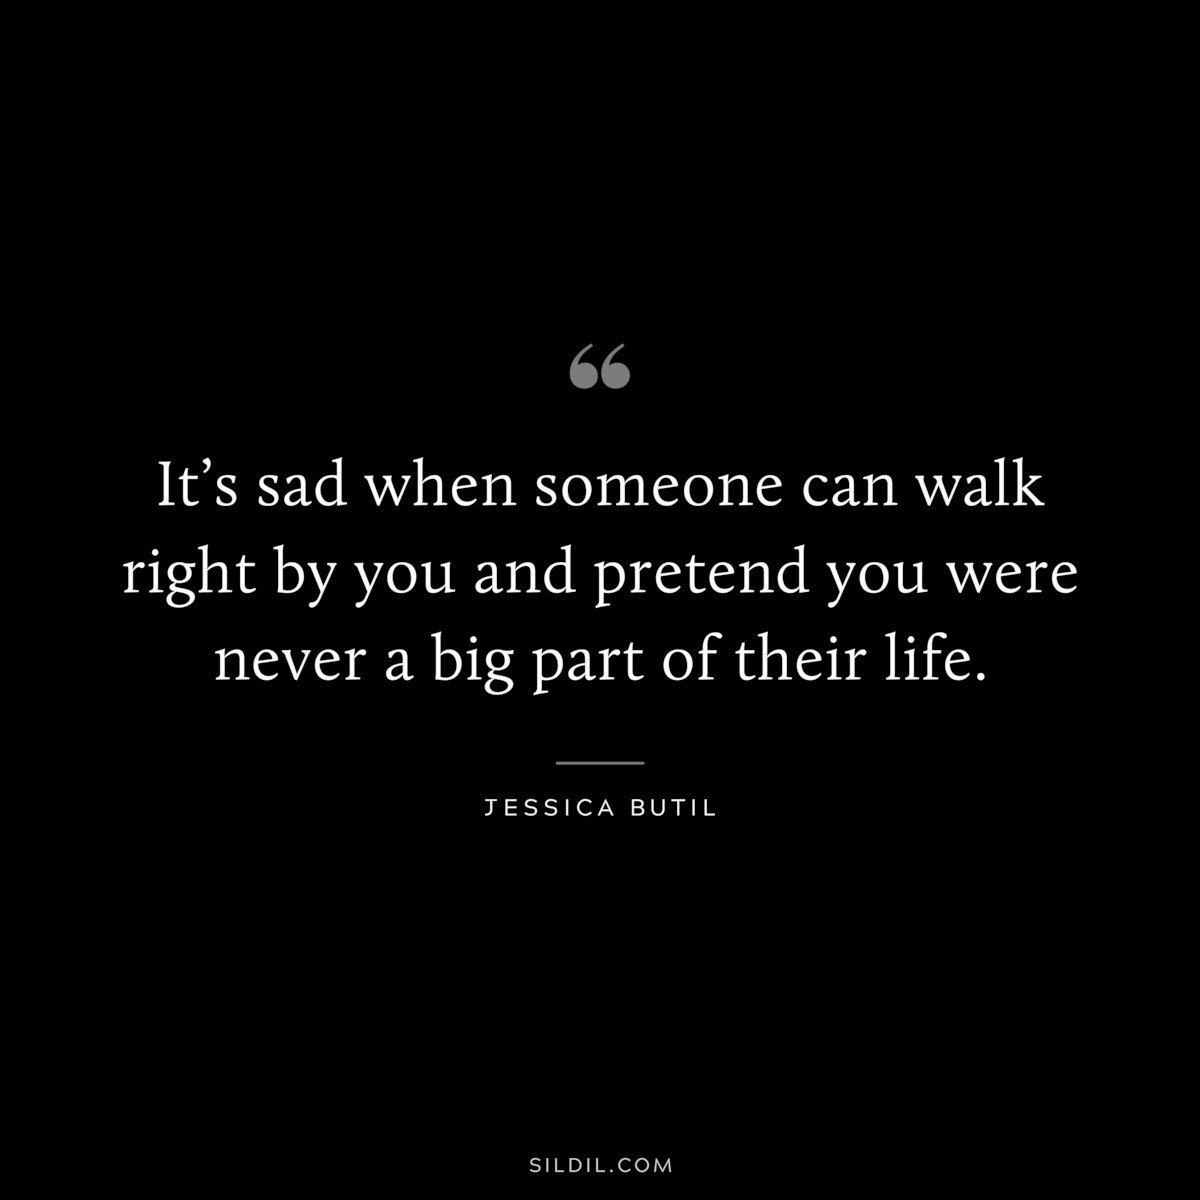 It’s sad when someone can walk right by you and pretend you were never a big part of their life. ― Jessica Butil